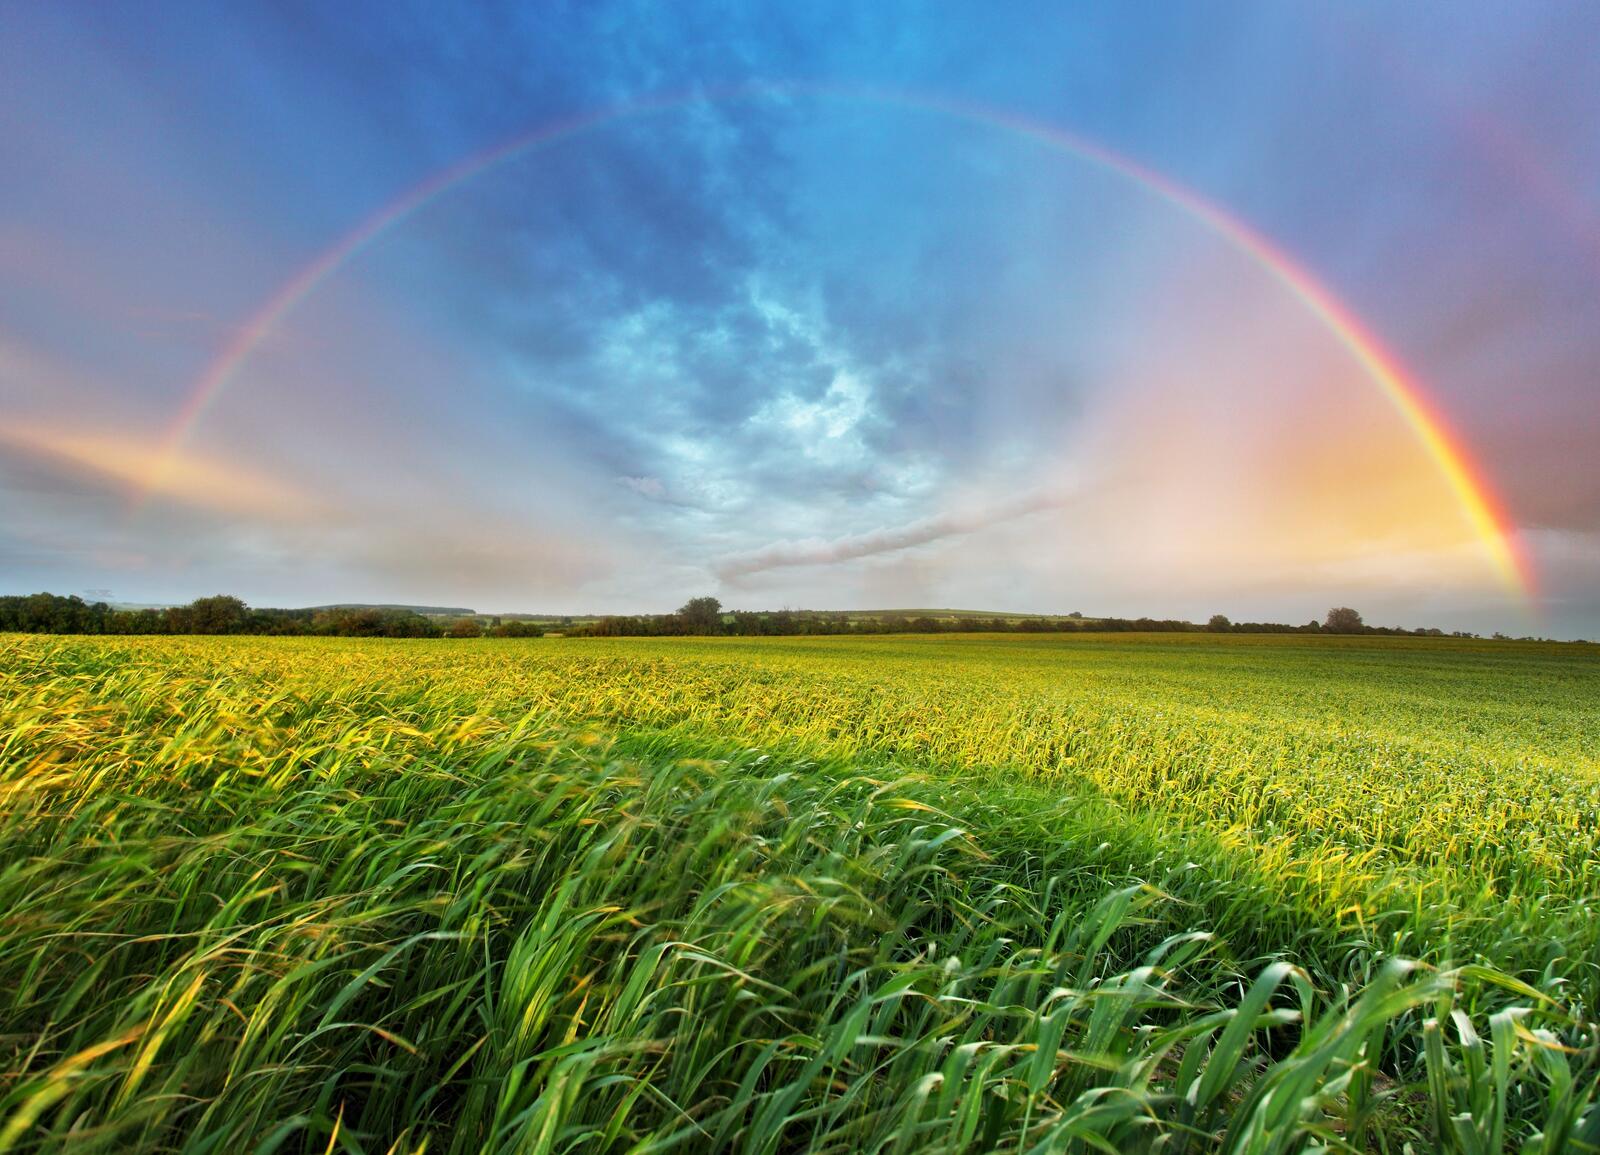 Wallpapers rainbow and field space landscapes on the desktop